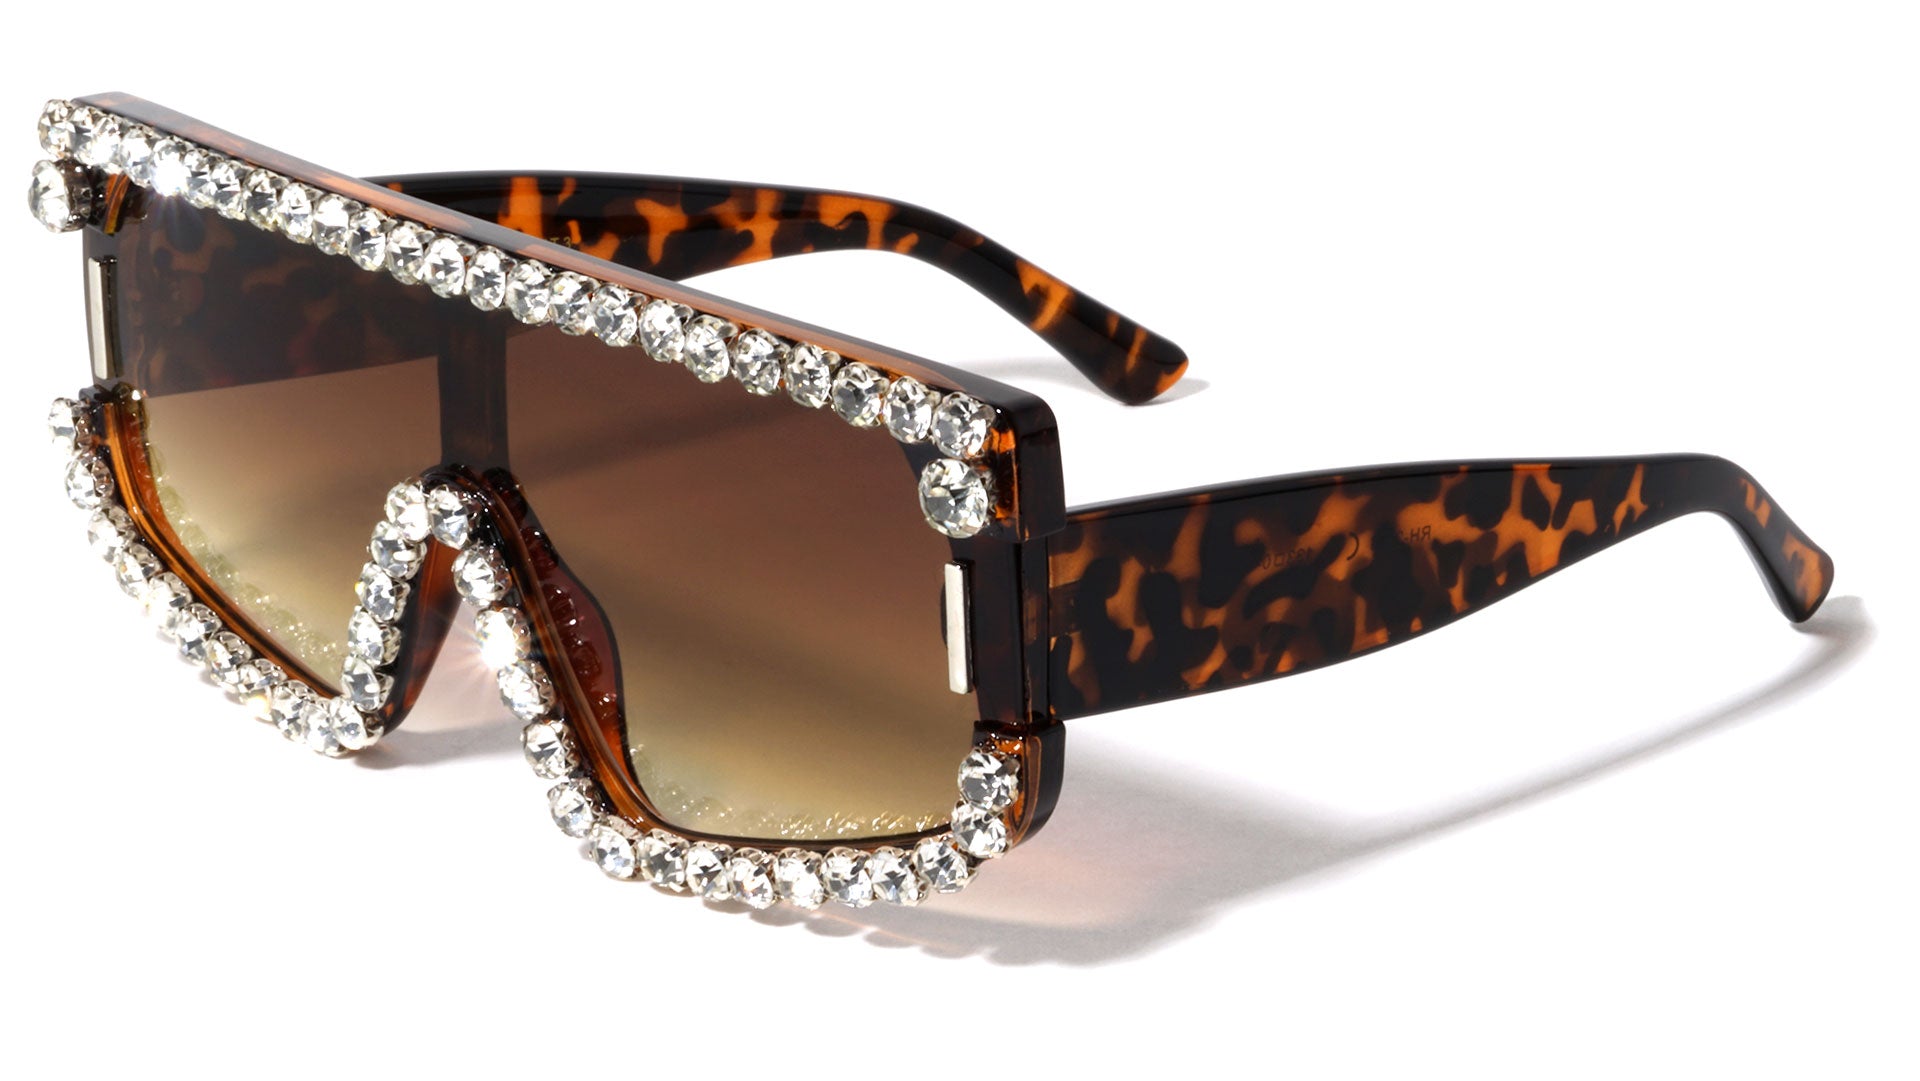 Dot Studded Frontal Demi Accent Rectangle Wholesale Sunglasses